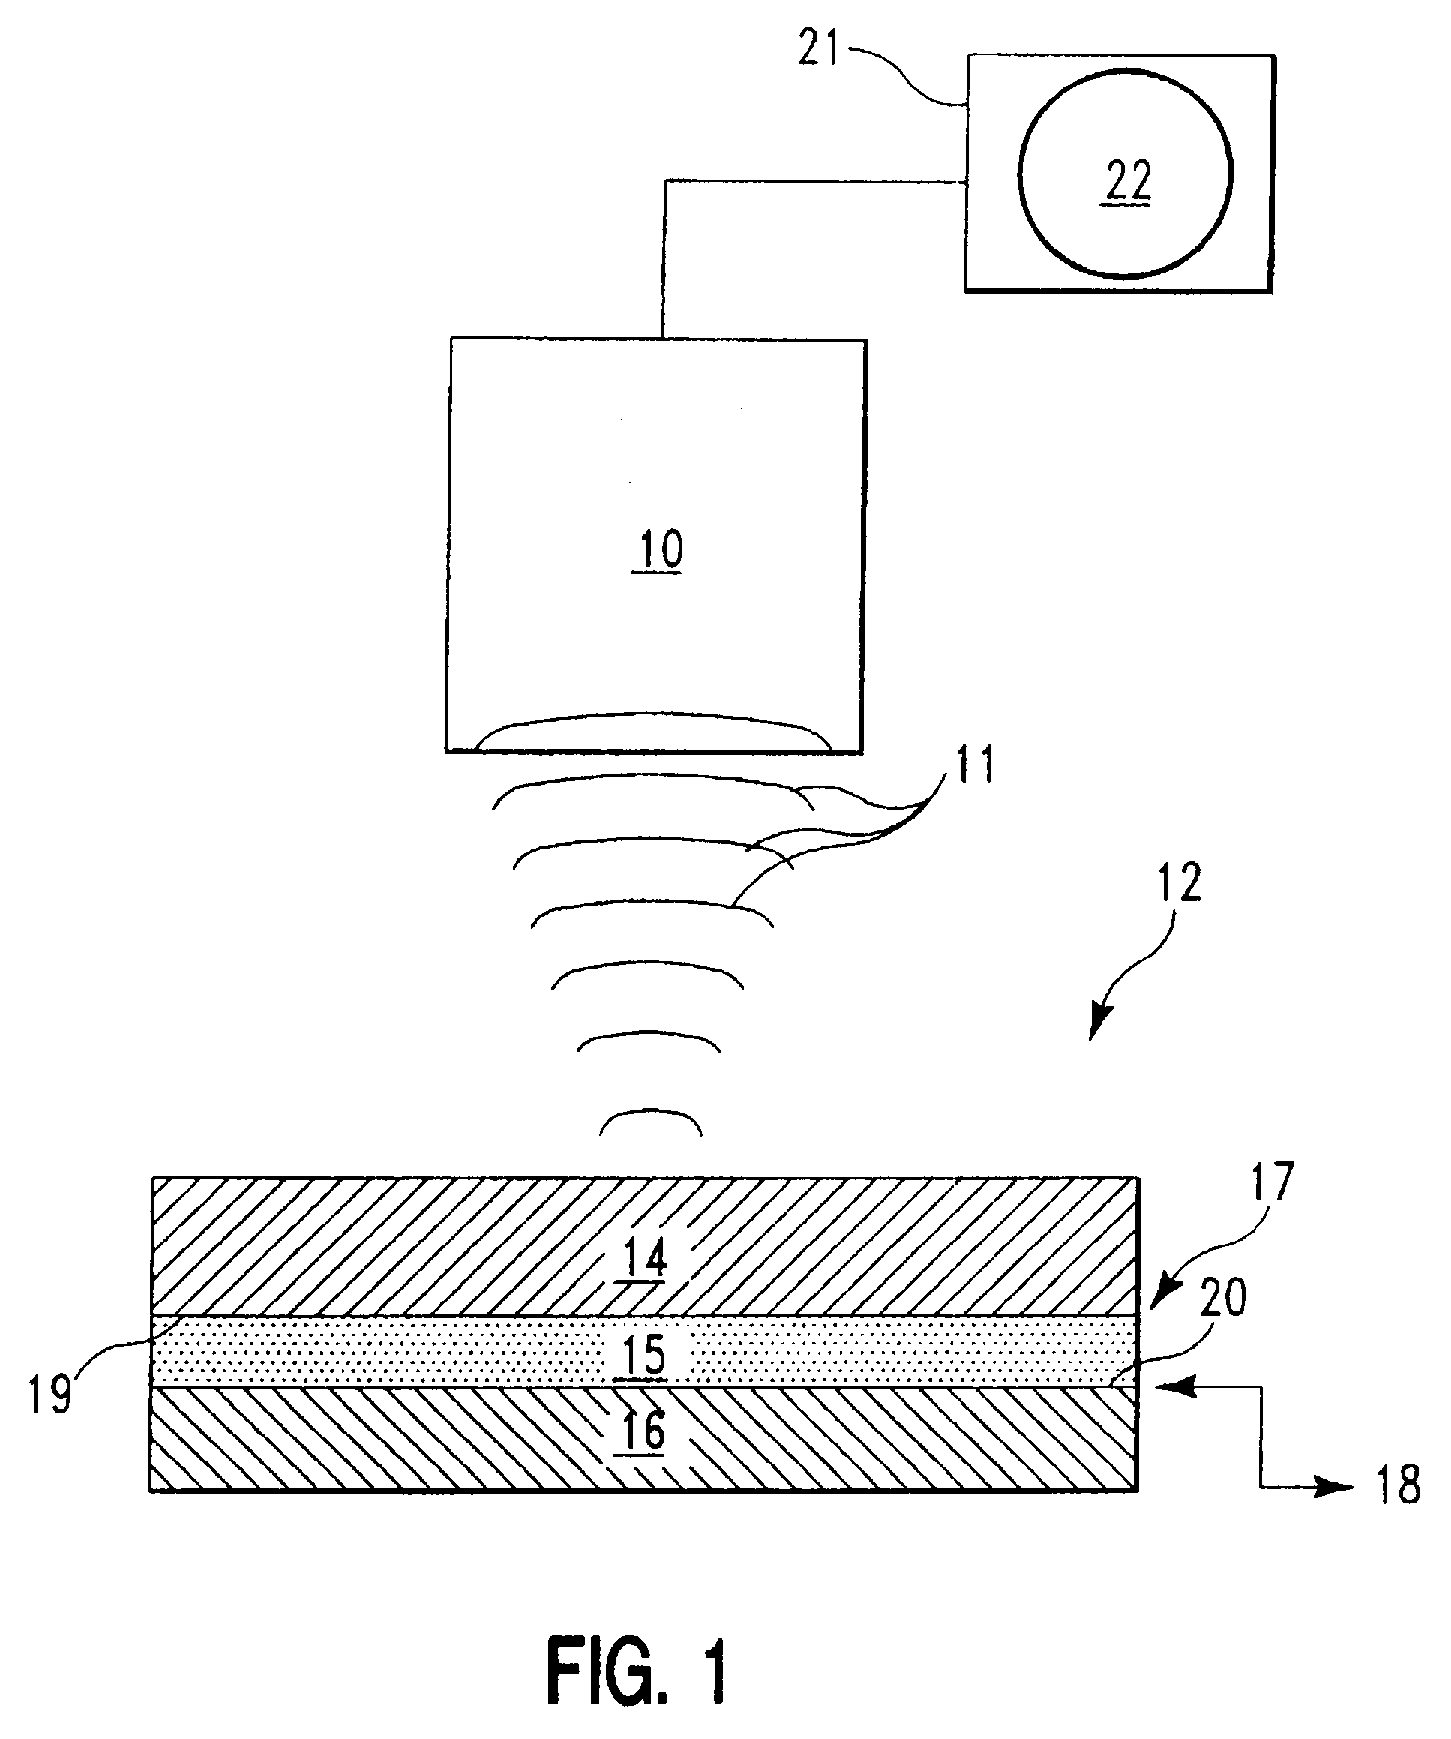 Method for measuring thin layers in solid state devices